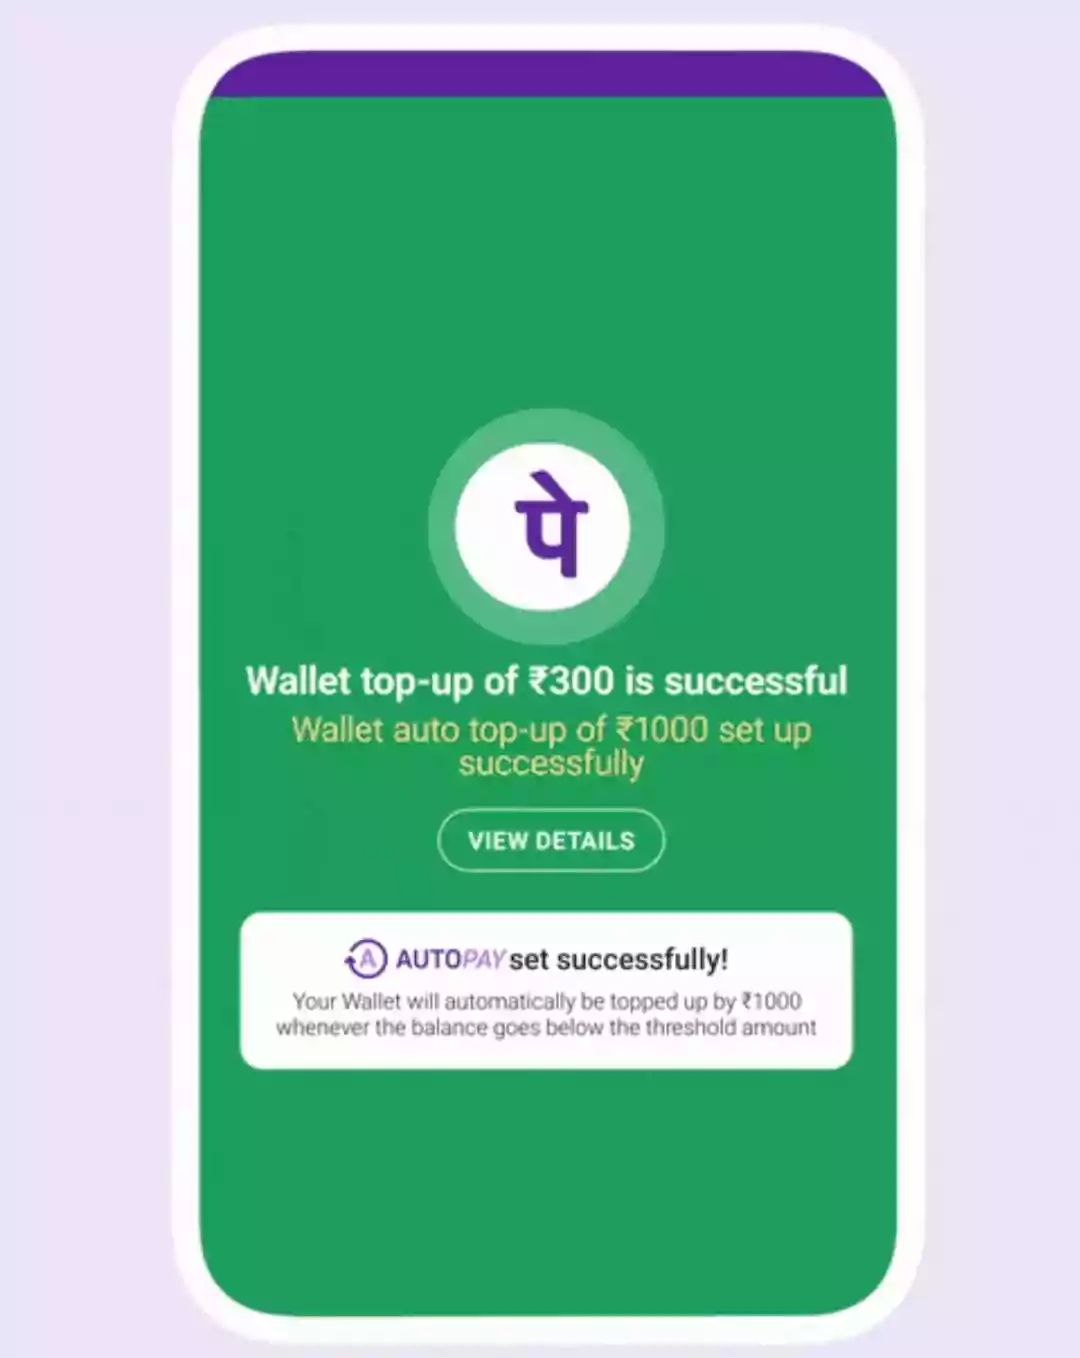 PhonePe Step Up Auto Top-Up